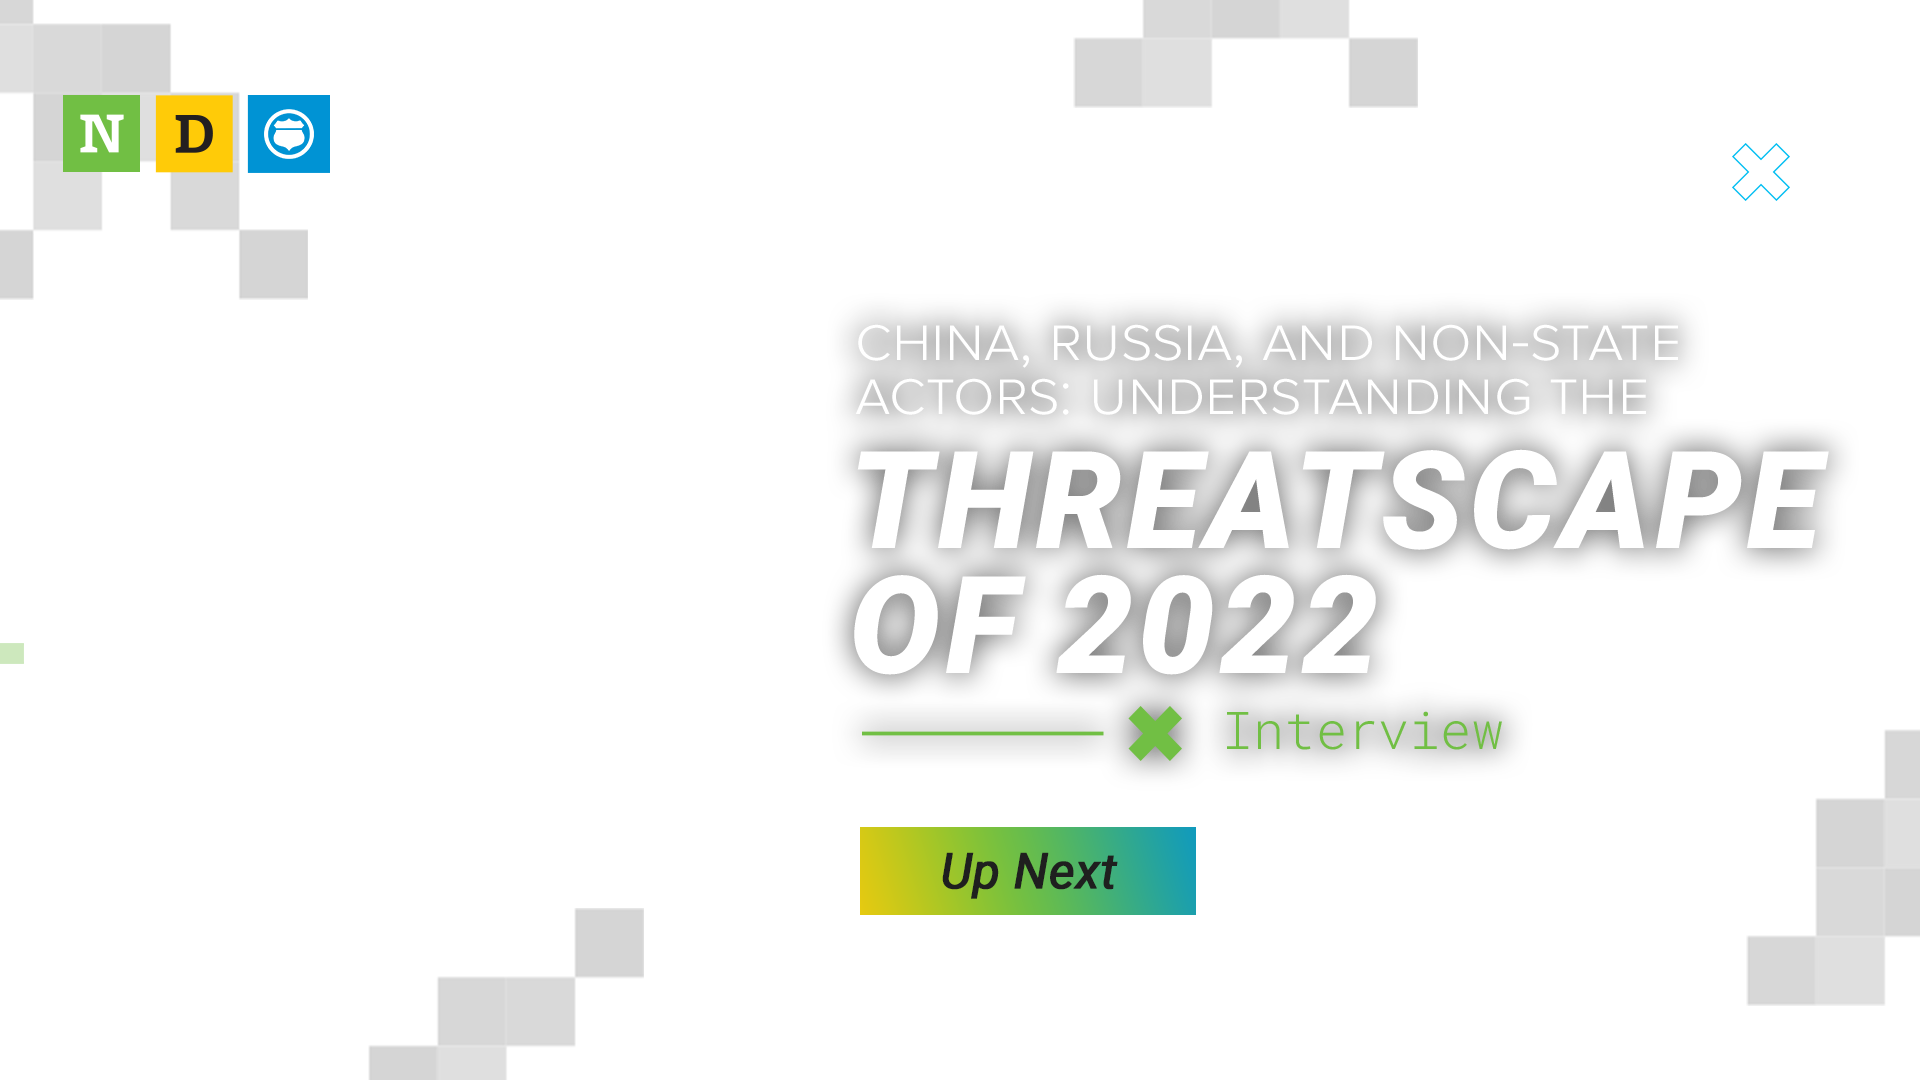 China, Russia, and Non-State Actors: Understanding the threatscape of 2022 Thumbnail